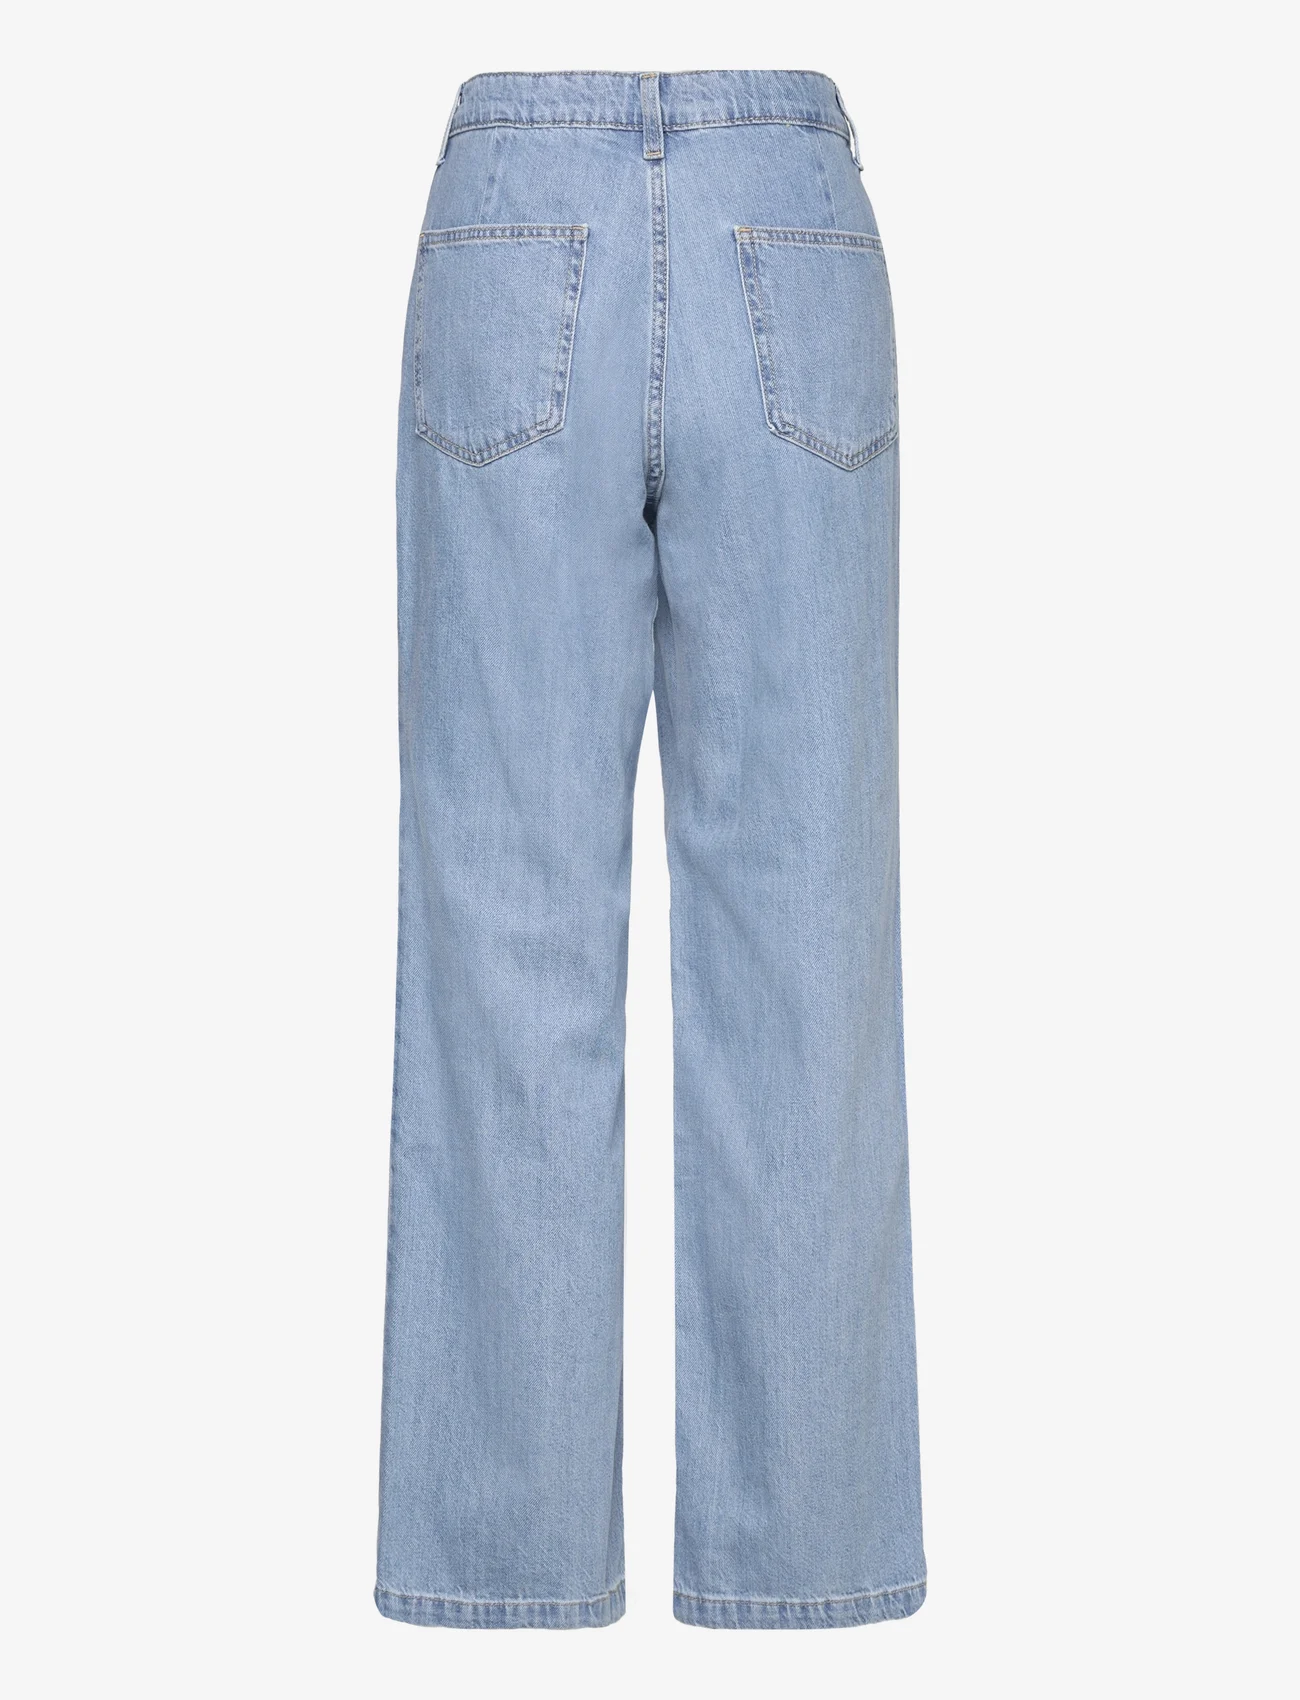 Mango - Straight pleated jeans - straight jeans - open blue - 1